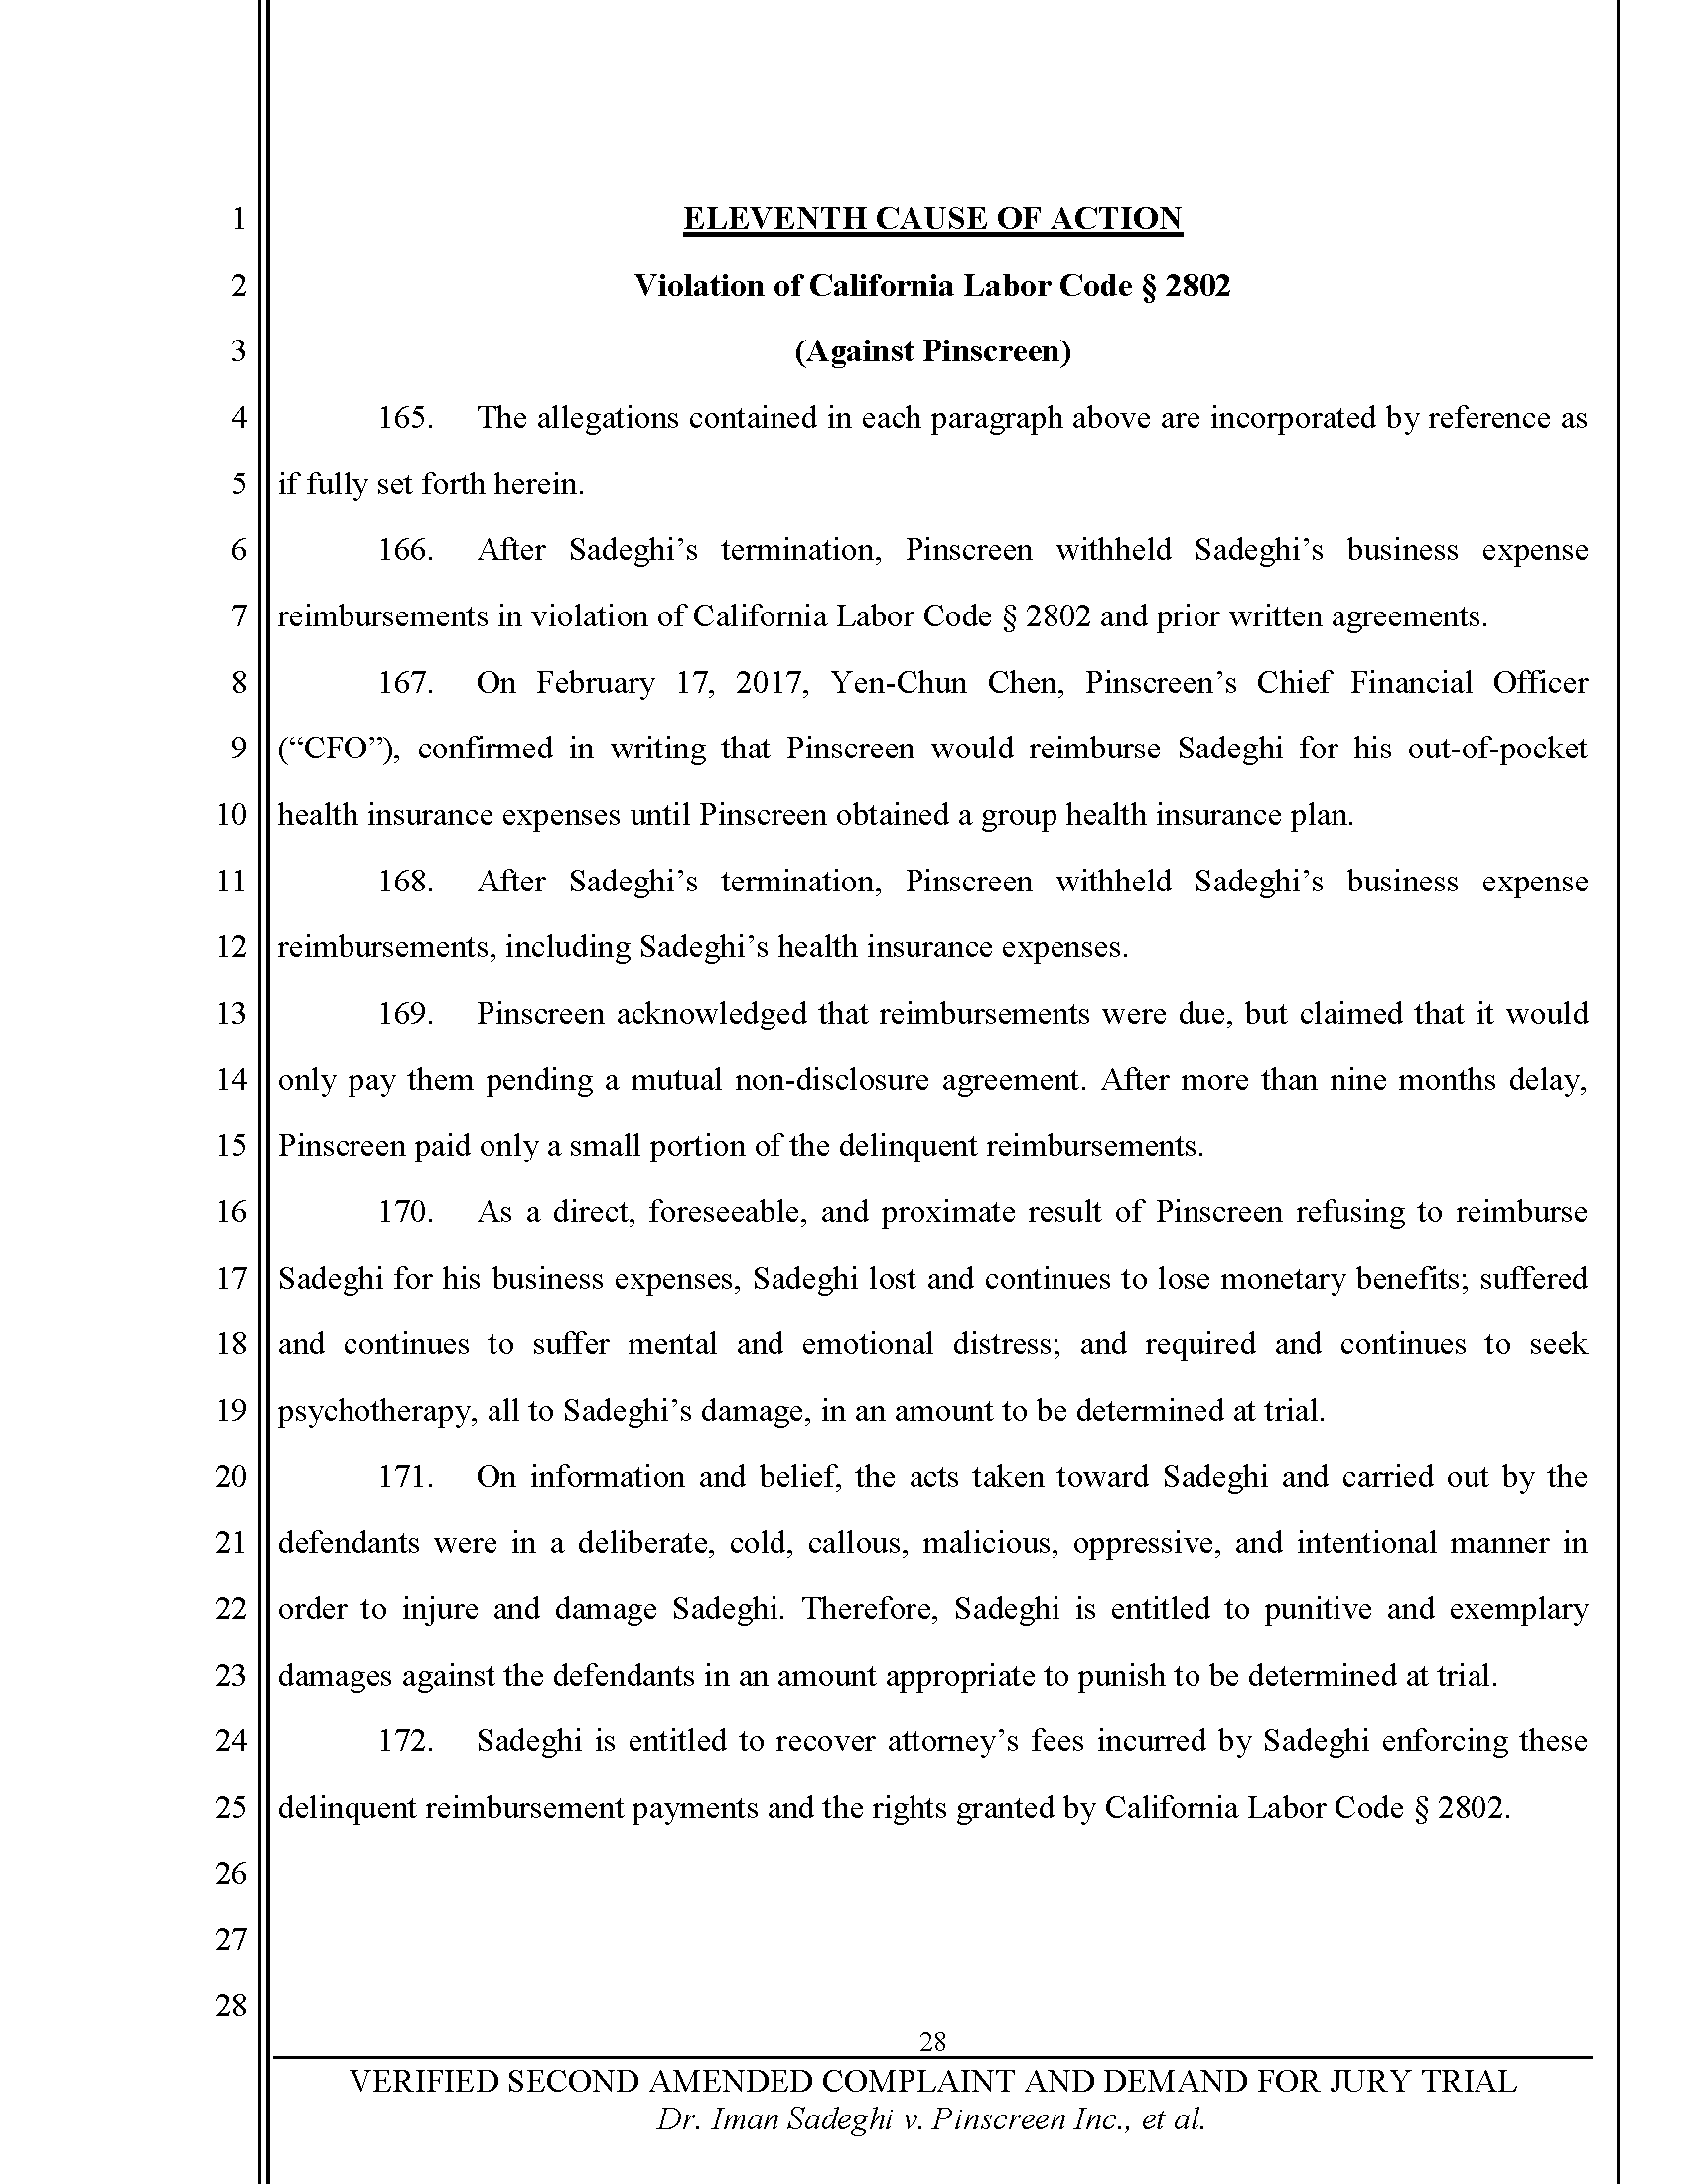 Second Amended Complaint (SAC) Page 29